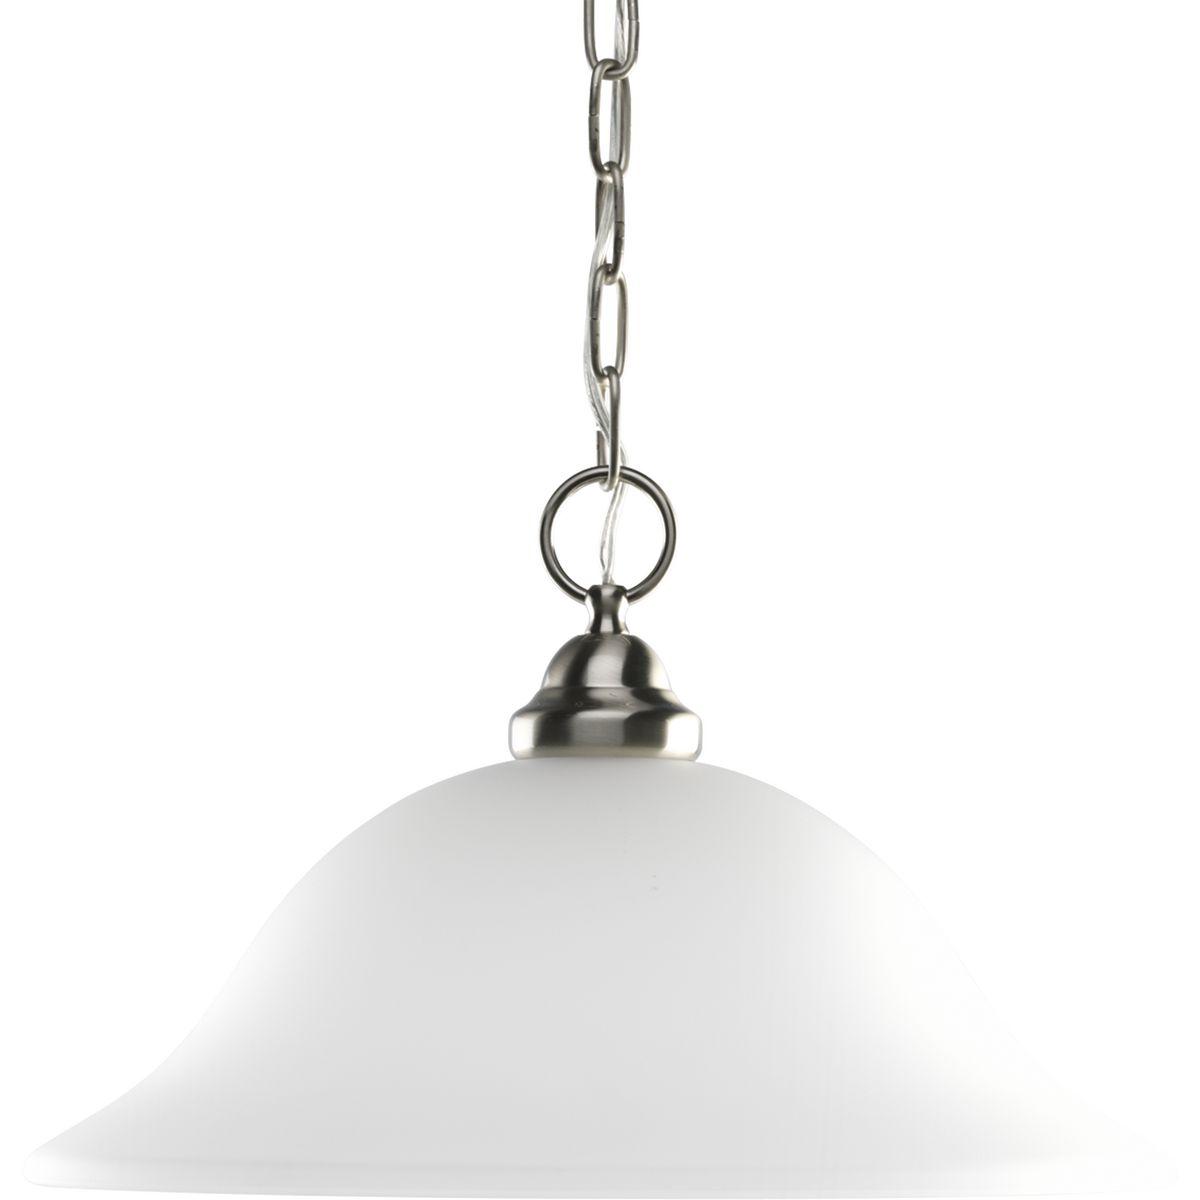 Hubbell HS41009-09 Classic styling defines this one-light pendant. Featuring a large, etched glass shade neatly suspended from a Brushed Nickel chain, this pendant is a welcome addition to any room.  ; Brushed Nickel finish ; Etched glass shade ; Classic, simple design ; Fi